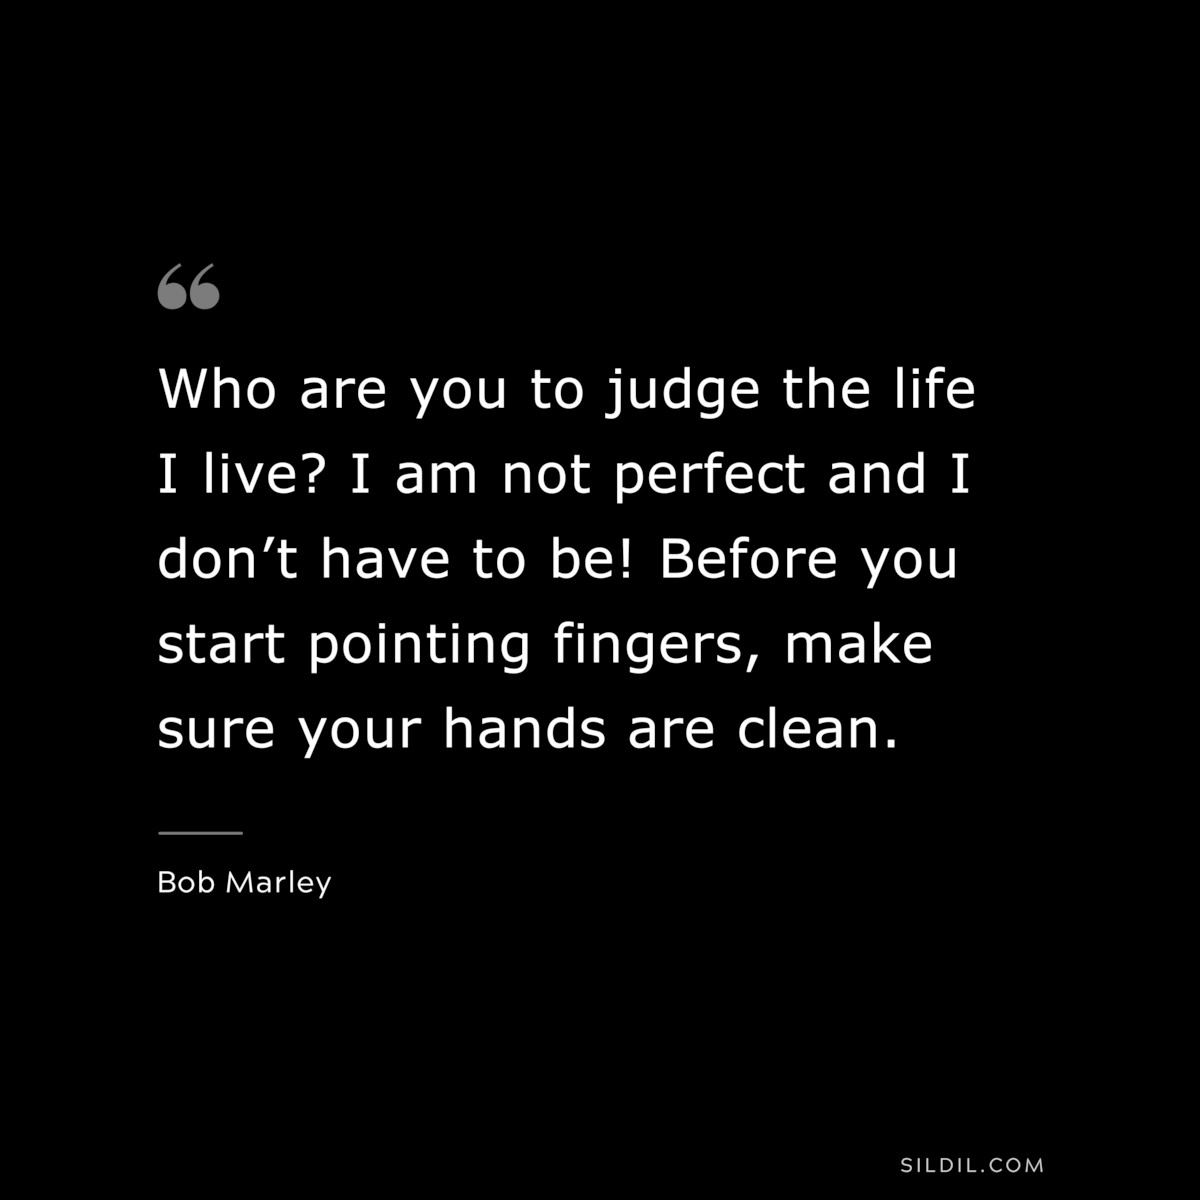 Who are you to judge the life I live? I am not perfect and I don’t have to be! Before you start pointing fingers, make sure your hands are clean. ― Bob Marley